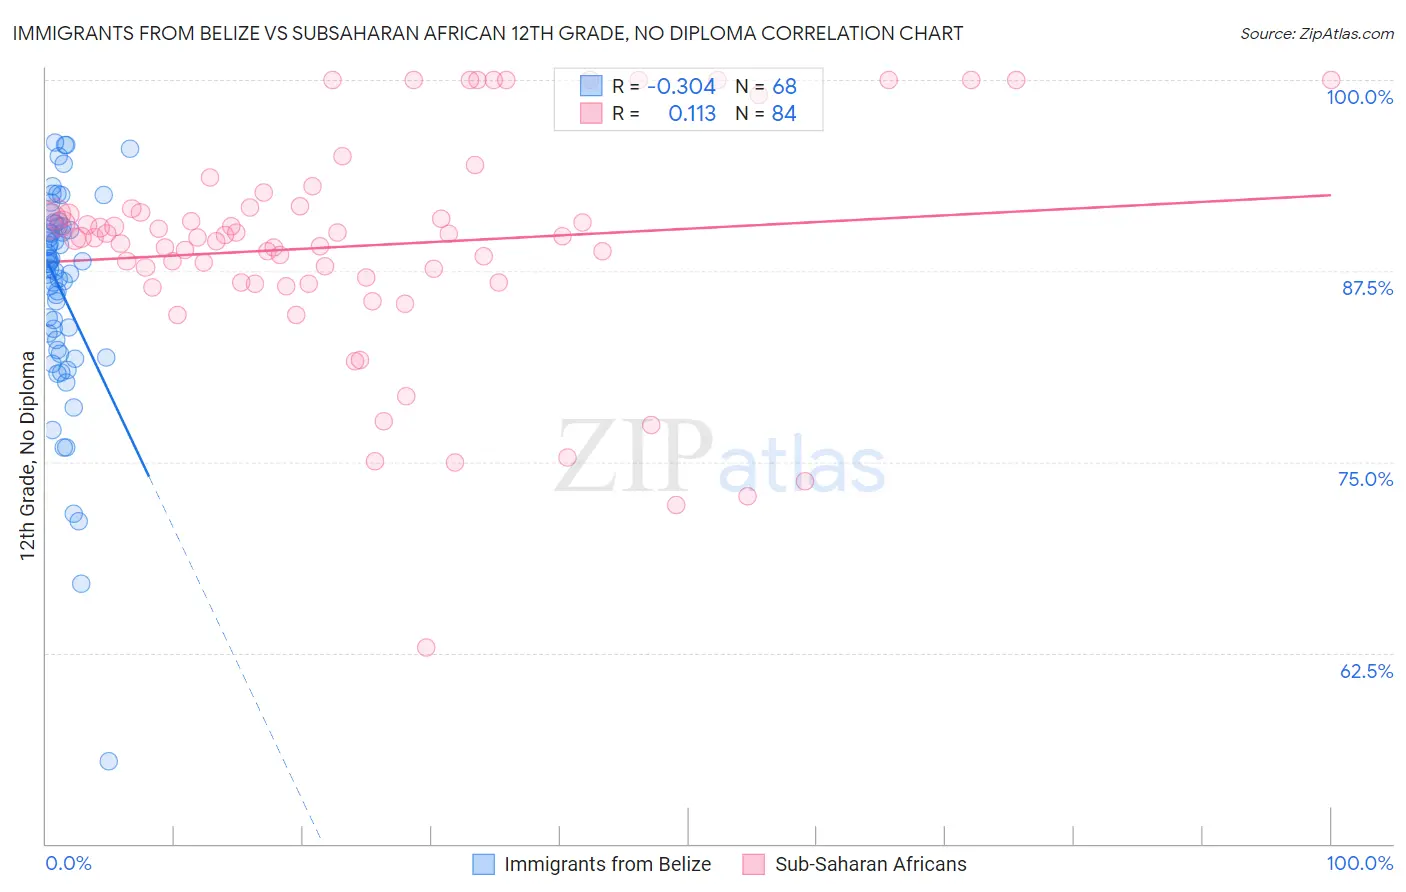 Immigrants from Belize vs Subsaharan African 12th Grade, No Diploma